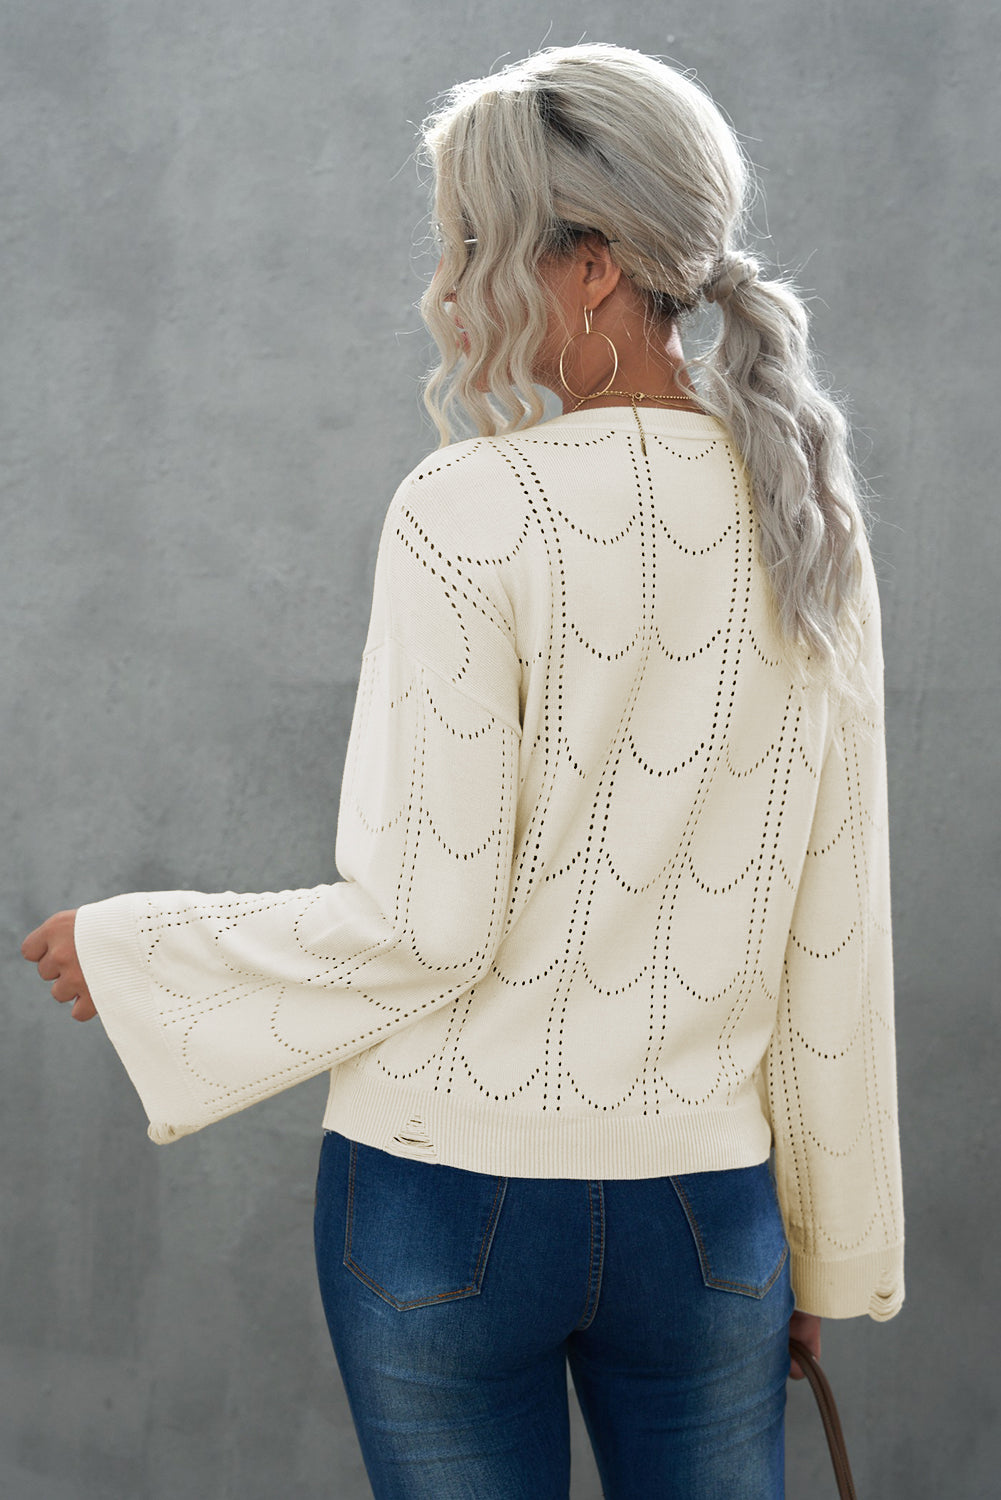 Lattice Work Pullover Sweater Top in Ivory and Caramel